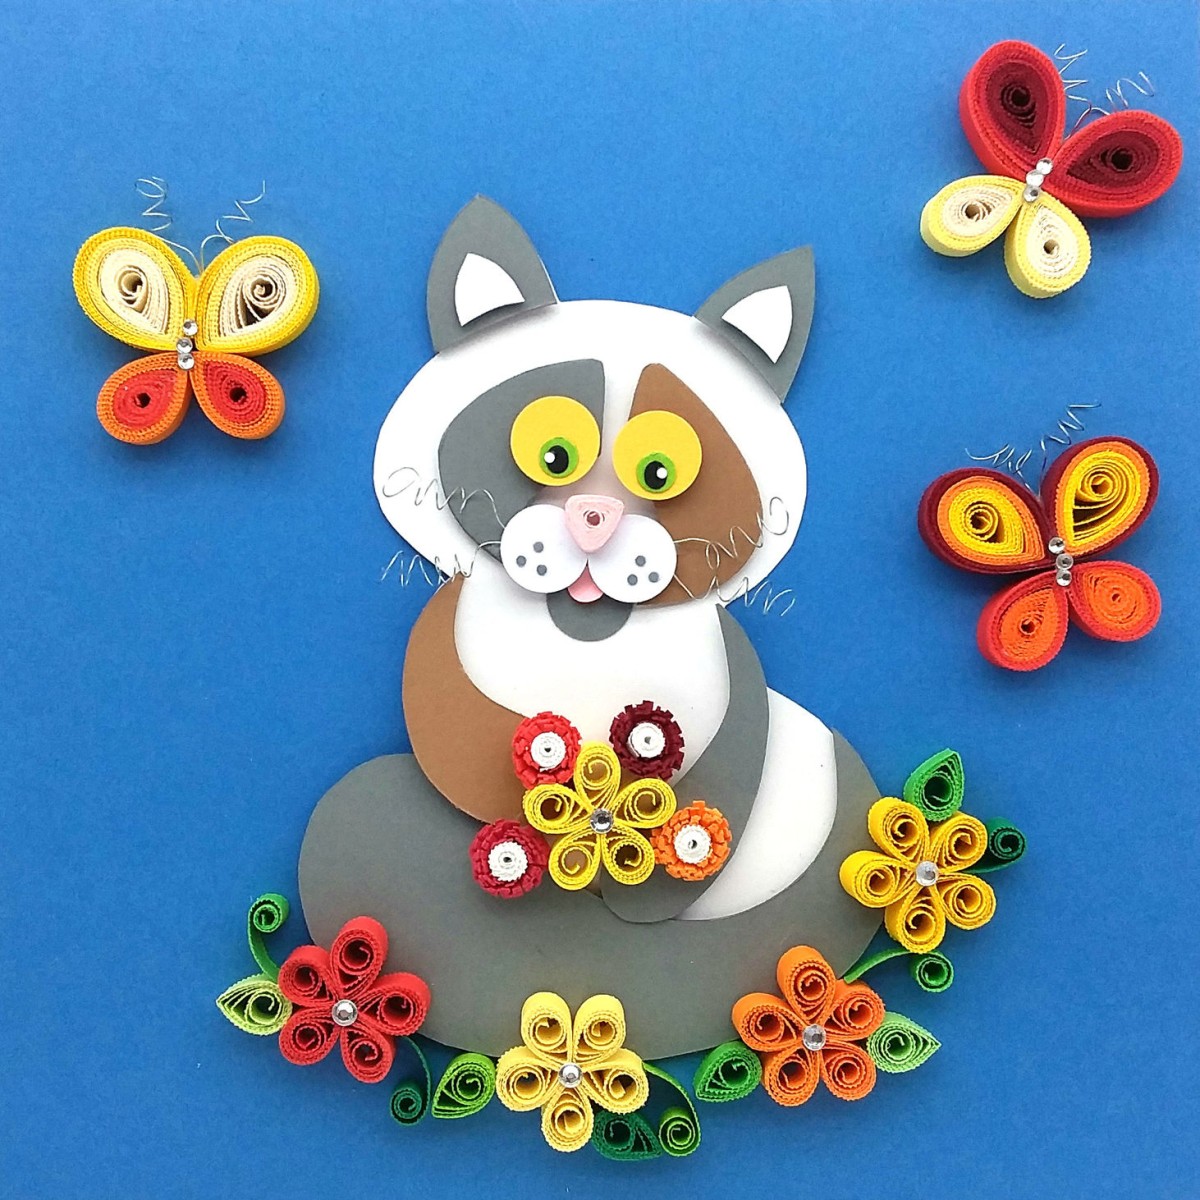 robuschi tableau quilling 2021-06-27 20-00-43